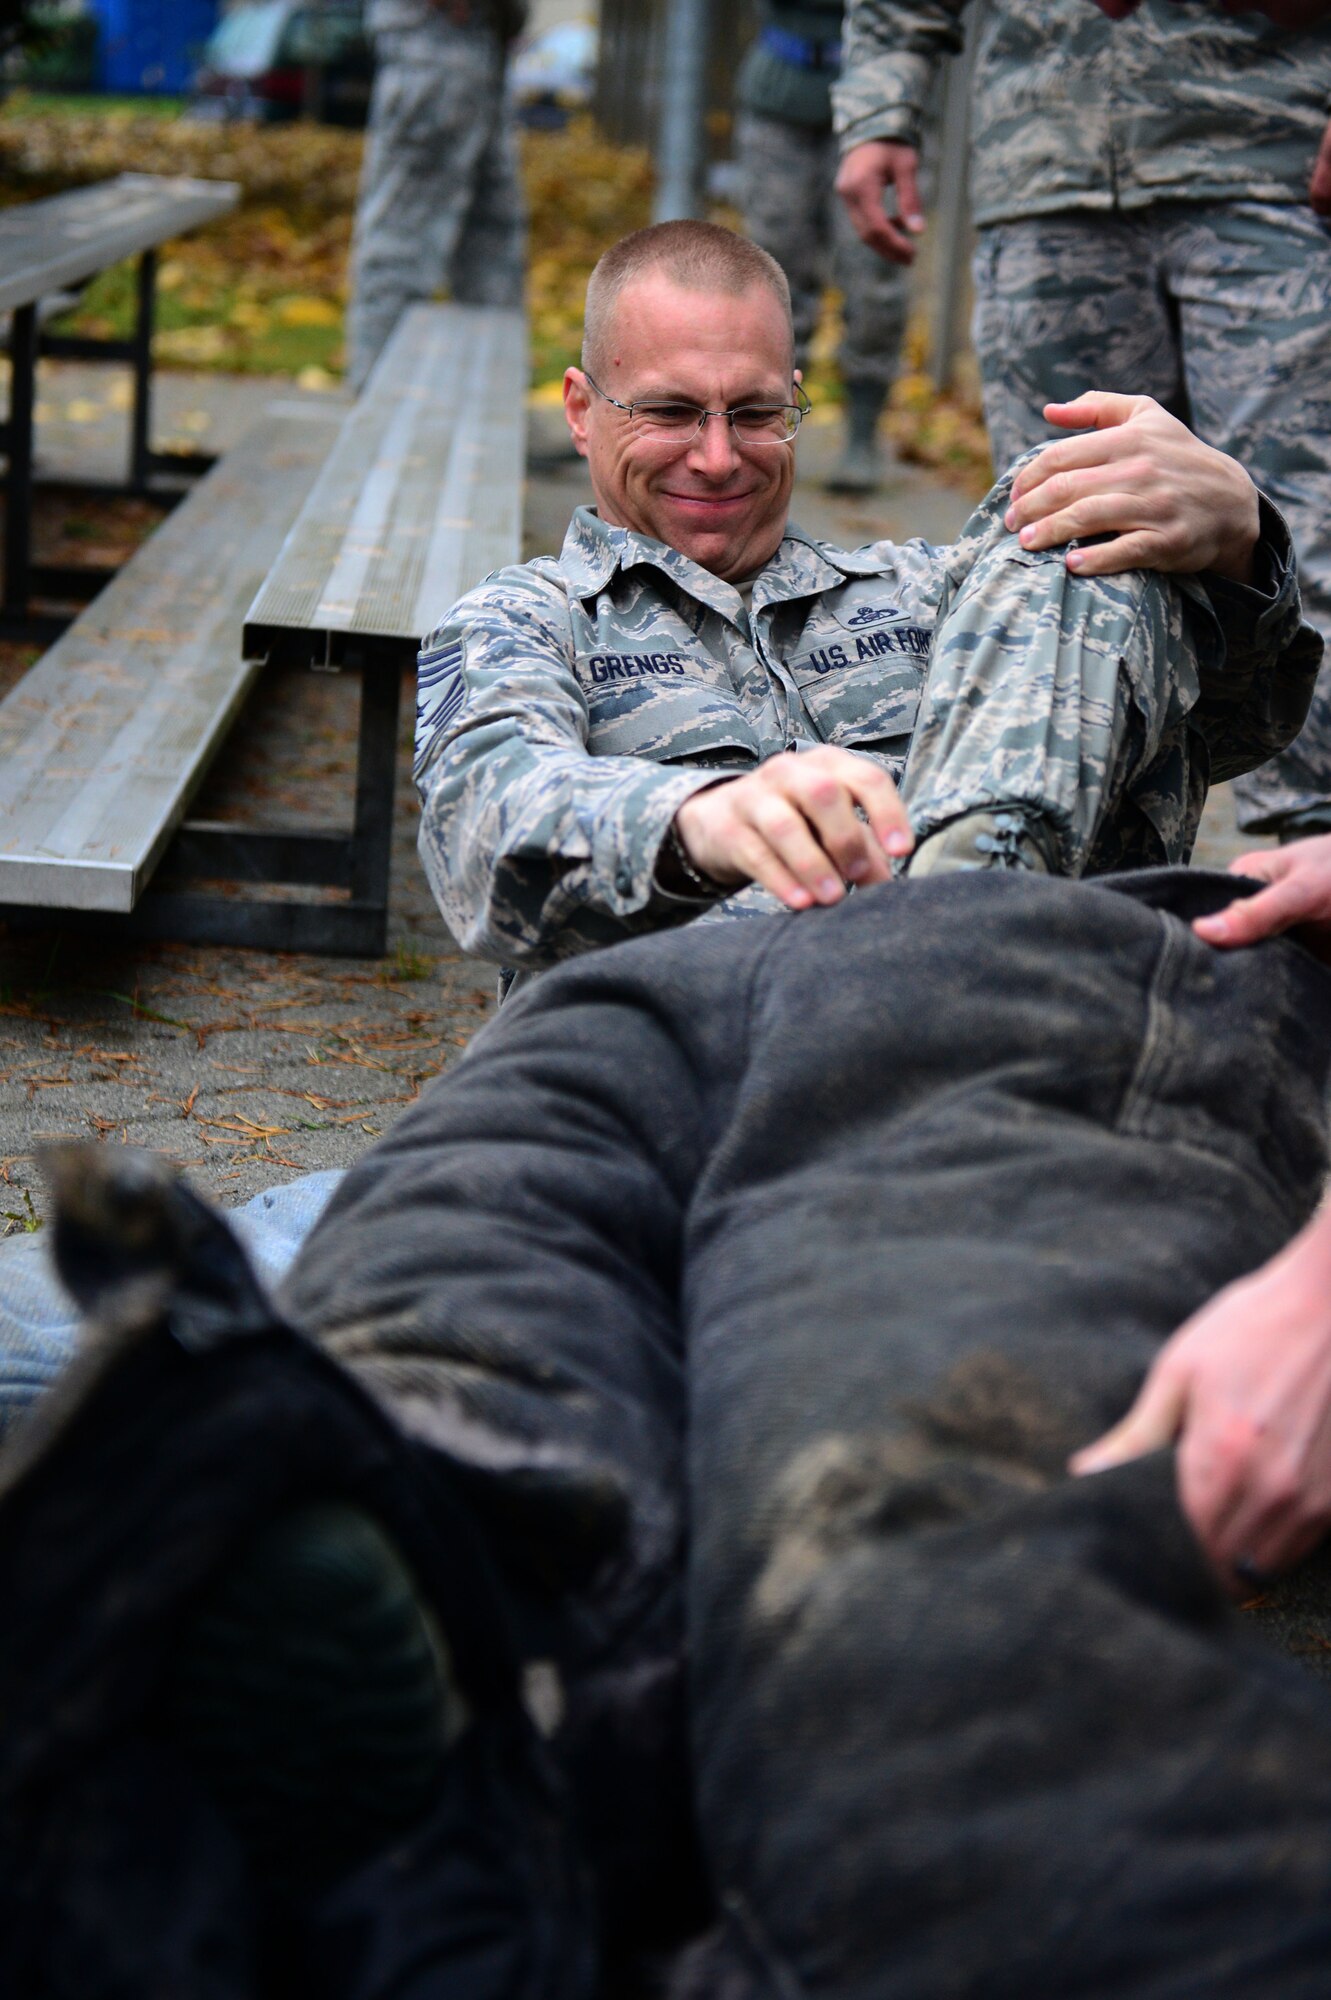 SPANGDAHLEM AIR BASE, Germany – U.S. Air Force Chief Master Sgt. Matthew Grengs, 52nd Fighter Wing command chief from Longmont, Colo. puts on a padded suit before a K-9 unit demonstration at the military working dog kennel Oct. 15, 2012.  These dogs, along with their handlers, are deployed worldwide to support the war on terror and safeguard military bases by detecting bombs, drugs and other illegal substances. (U.S. Air Force photo by Airman 1st Class Gustavo Castillo/Released)